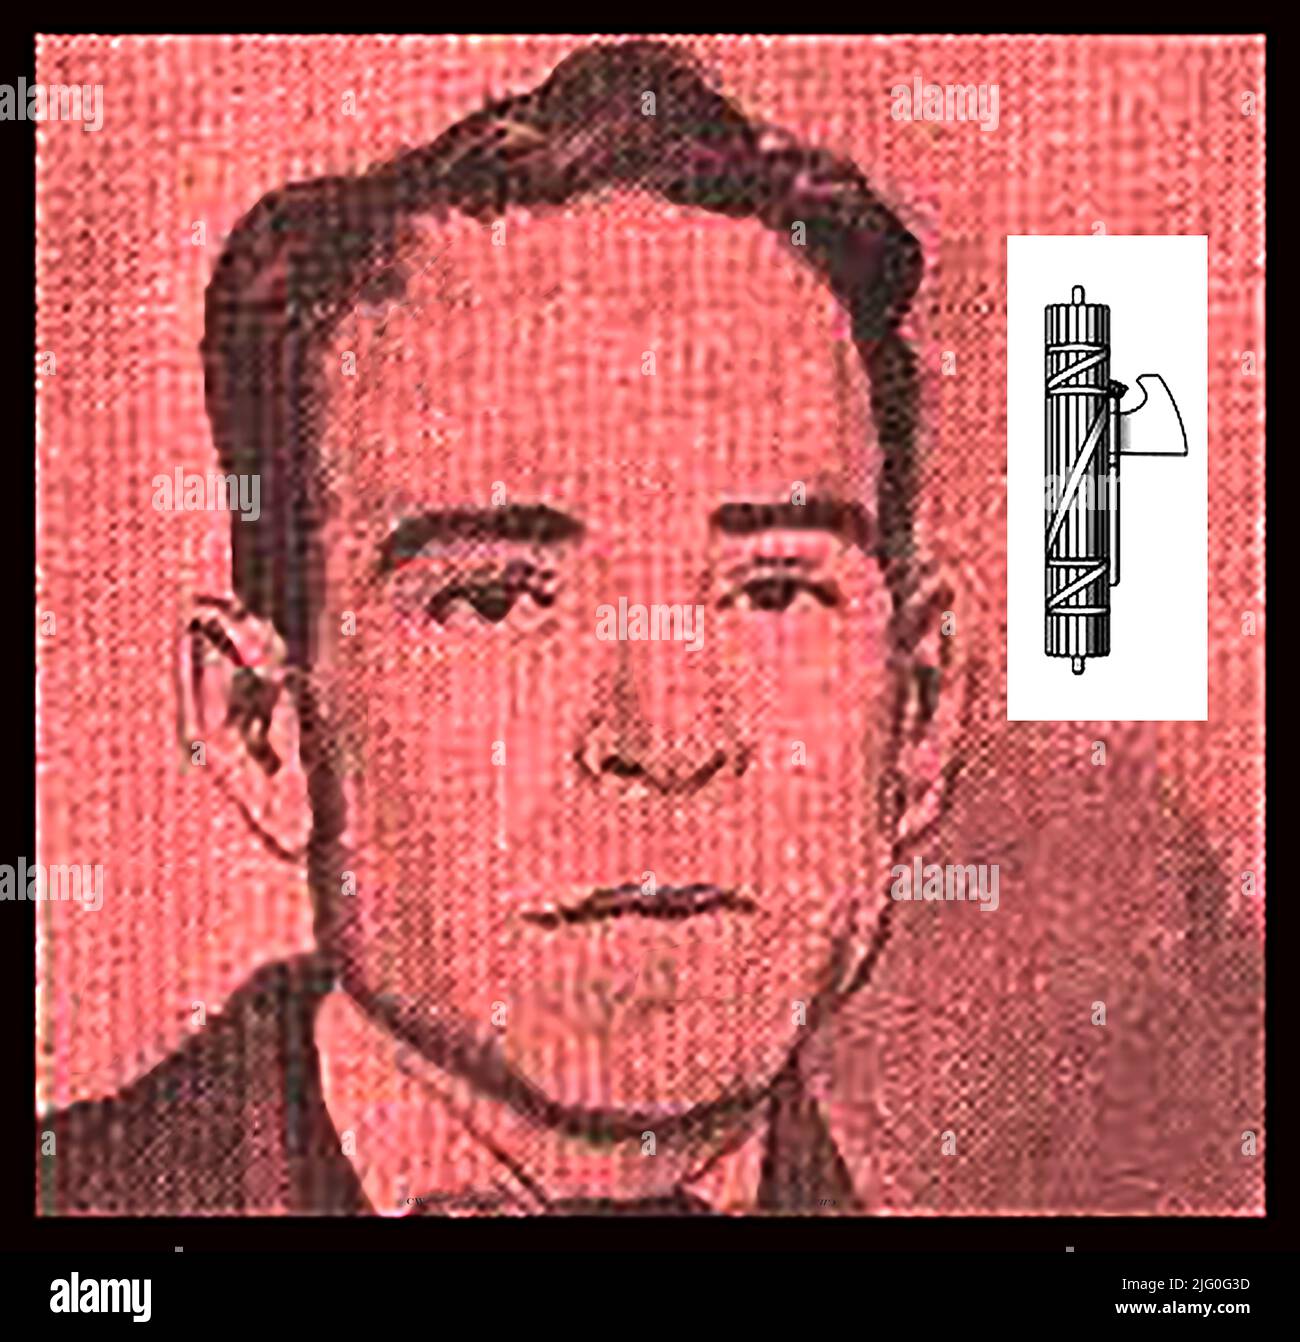 Portrait of Italian born US  anarchist Niccolo Sacco (inset is the fascist fasces symbol). Two  US  Italian migrants Sacco &  Vanzetti     were controversially accused of being anarchists who had murdered a guard and a paymaster during an armed robbery at the Slater and Morrill Shoe Company in Braintree, Massachusetts. They were found guilty and were executed in the electric chair at Charlestown State Prison on July 14, 1921. Some believe that they were innocent scapegoats used  as a convenient means to put a stop to their militant activities supporting   Galleanists. Stock Photo